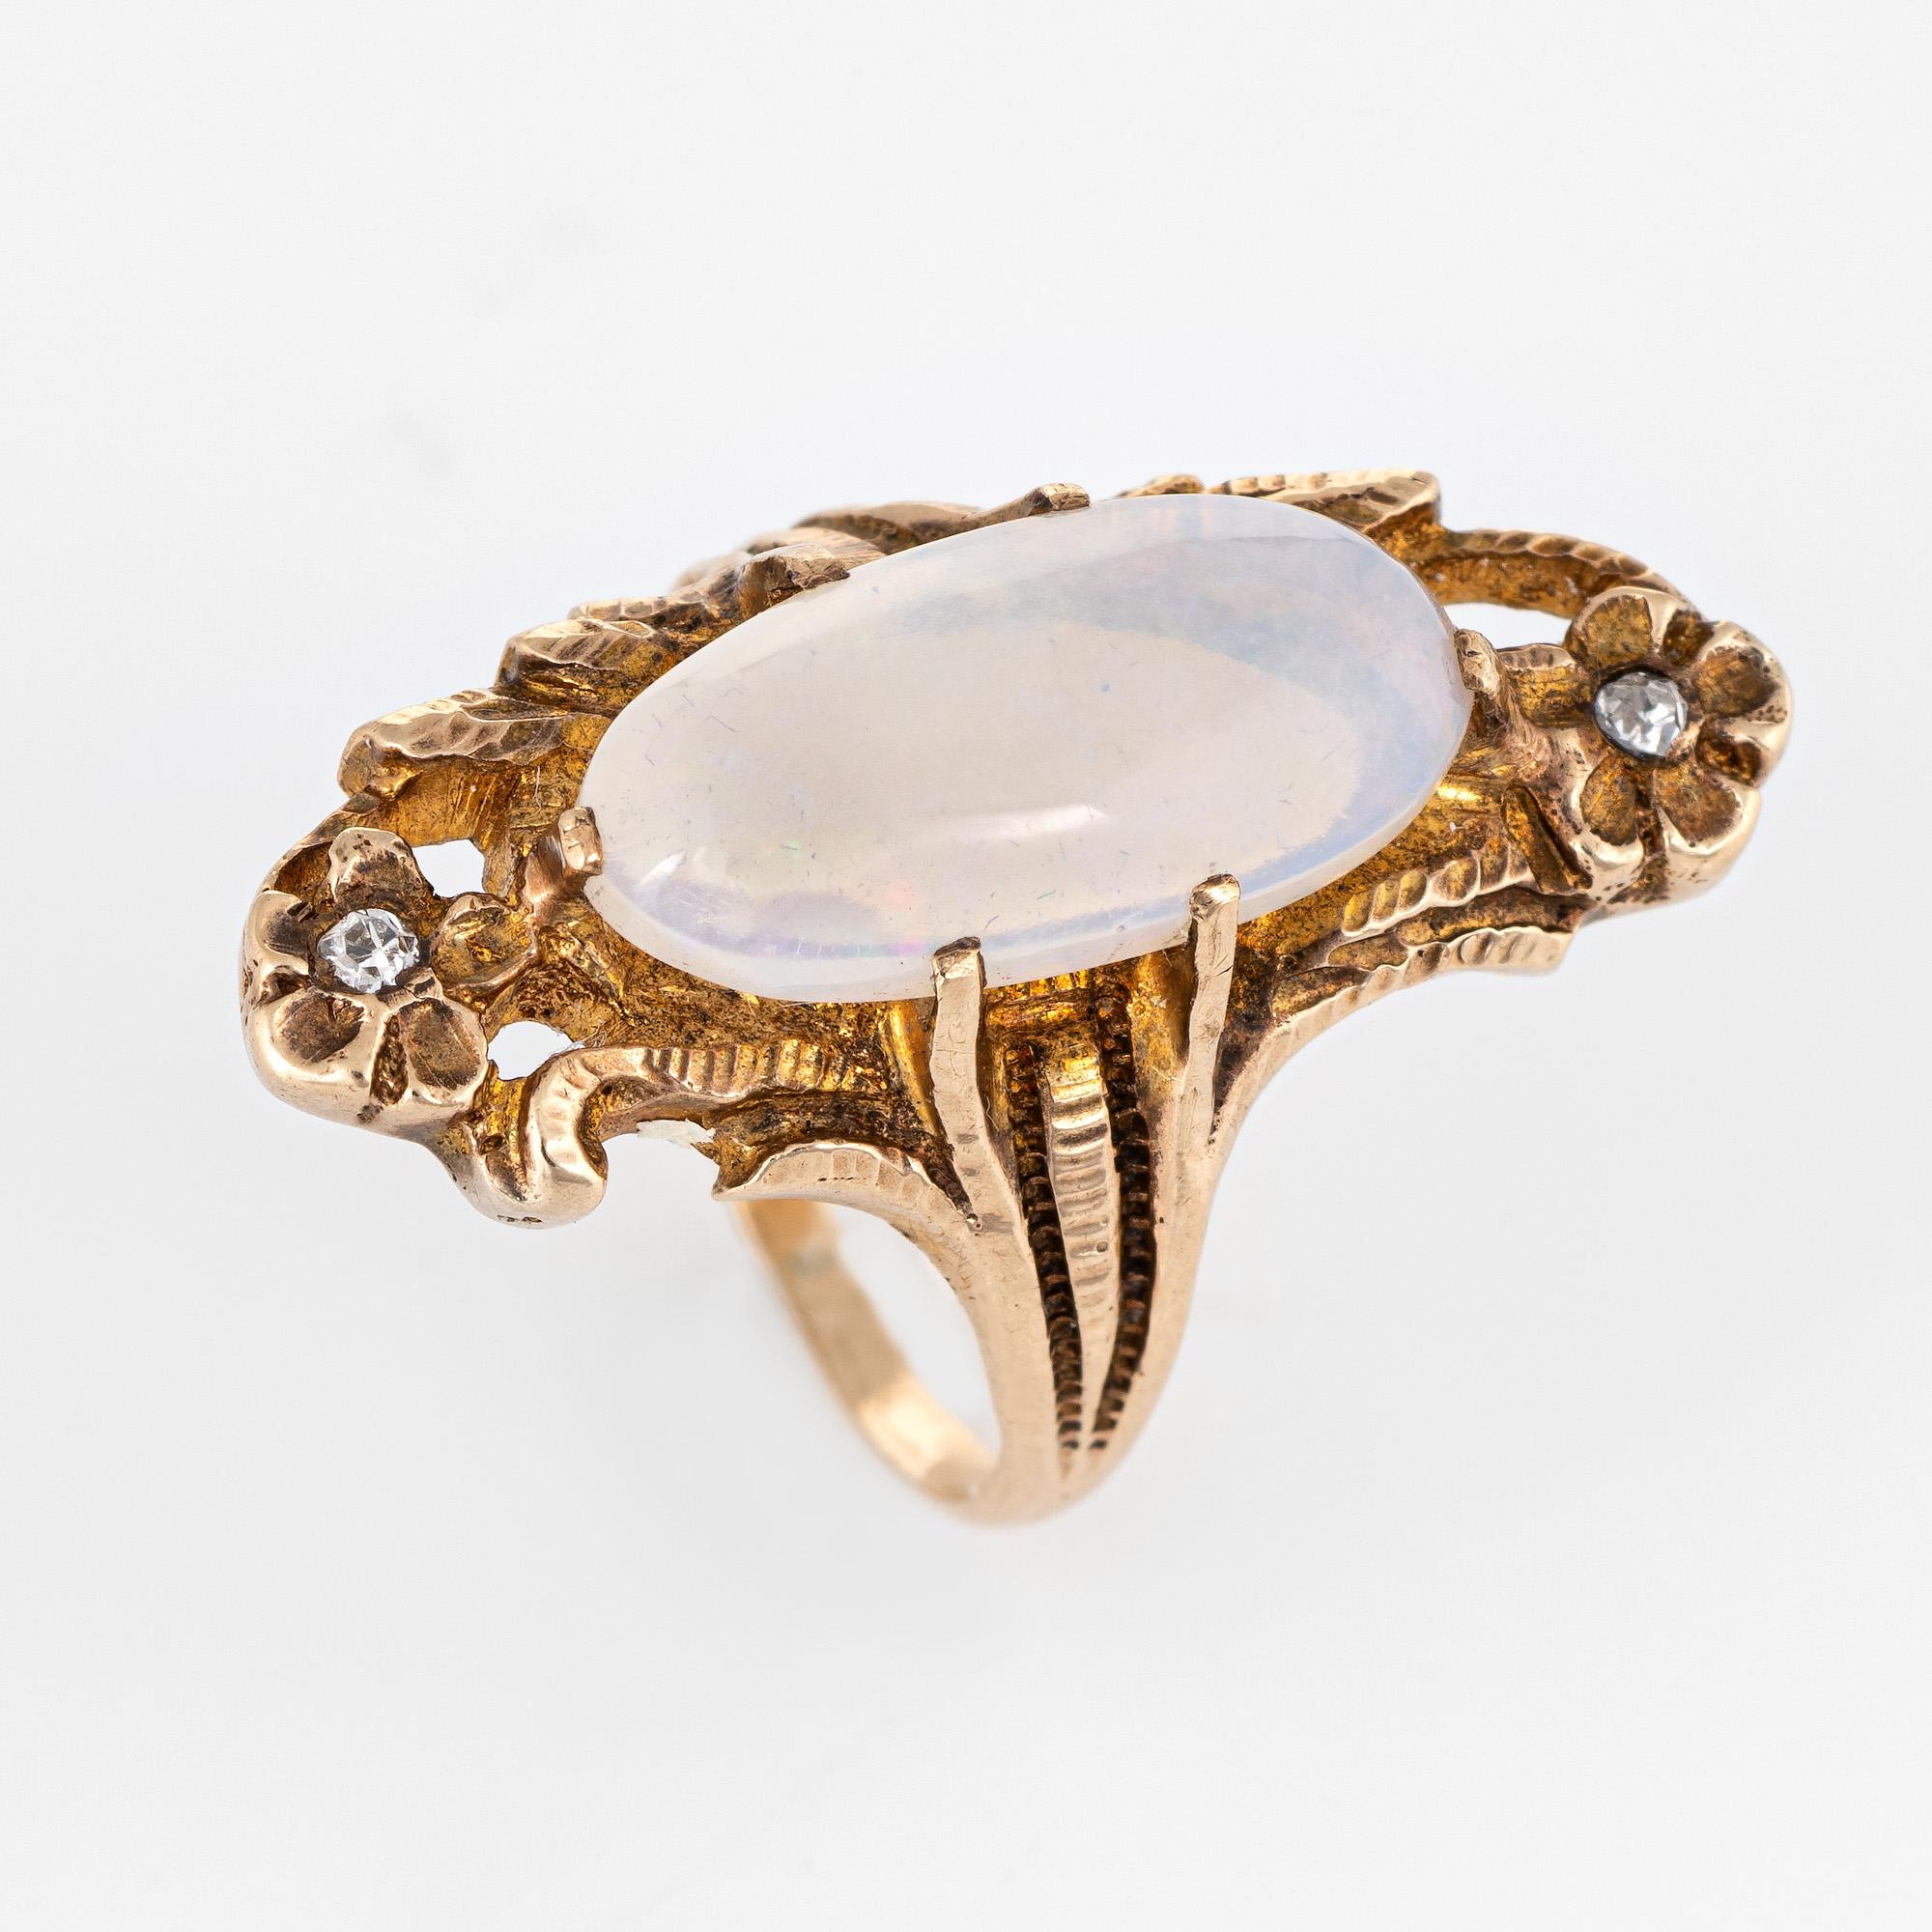 Finely detailed antique Art Nouveau era opal & diamond ring (circa 1900s to 1910s) crafted in 10 karat yellow gold. 

Cabochon cut opal measures 16mm x 7.5mm (estimated at 3.50 carats), accented with two estimated 0.01 carat old single cut diamonds.